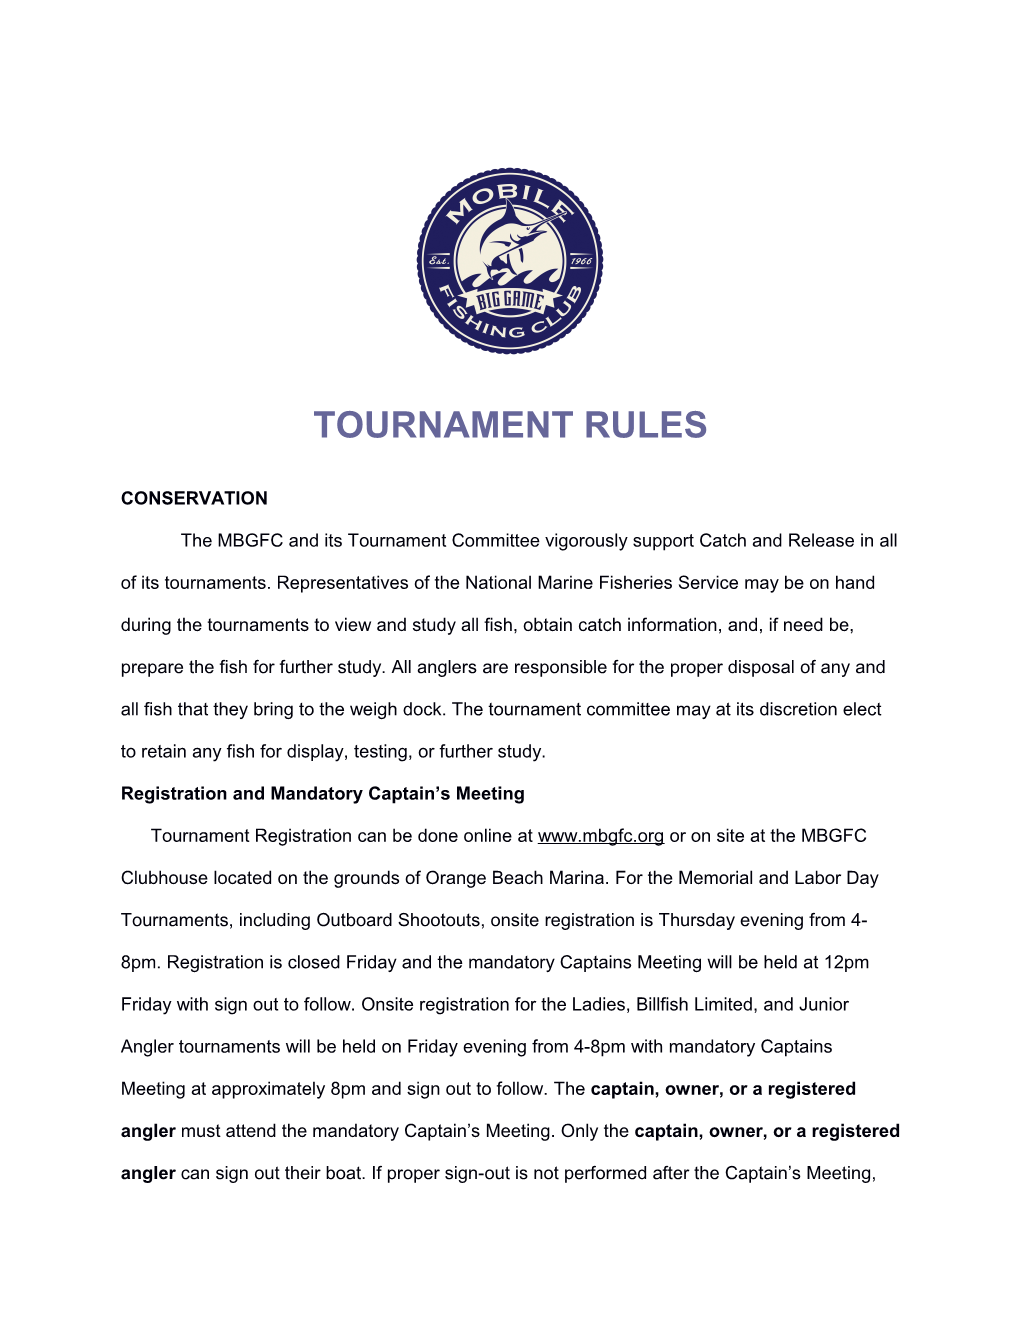 Tournament Rules